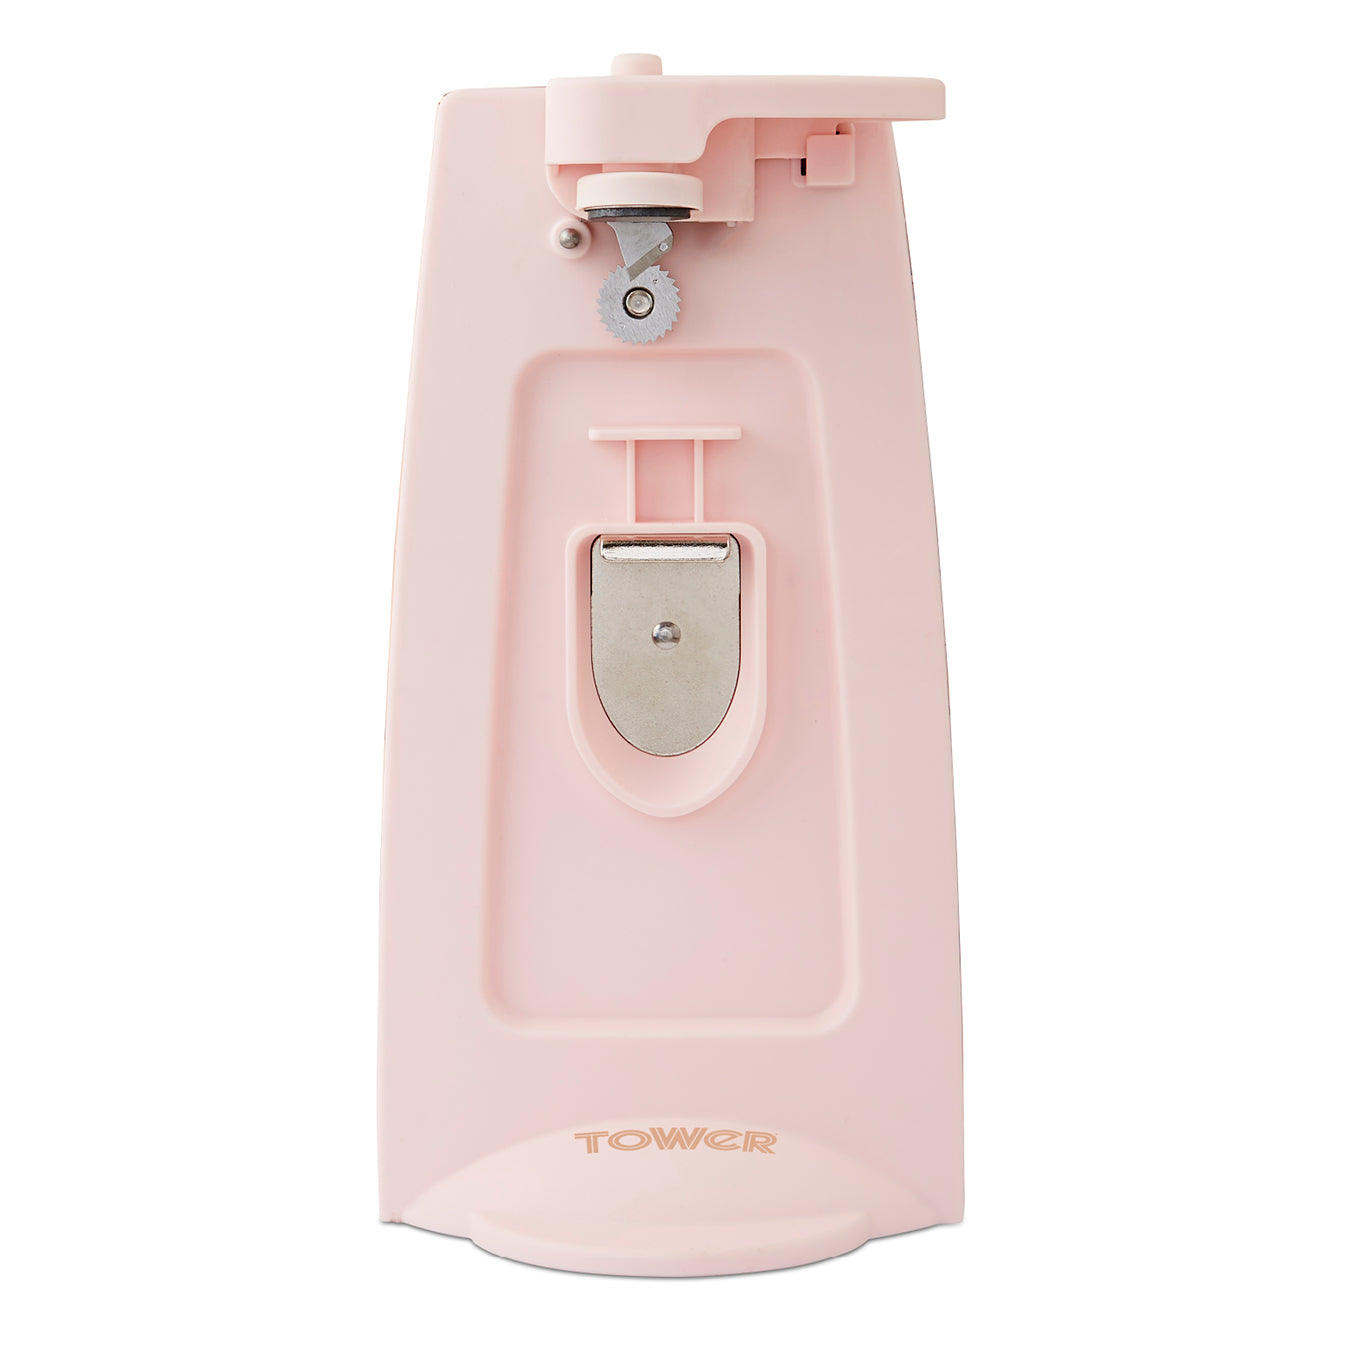 Tower Cavaletto 3 in 1 Can Opener - Pink  | TJ Hughes